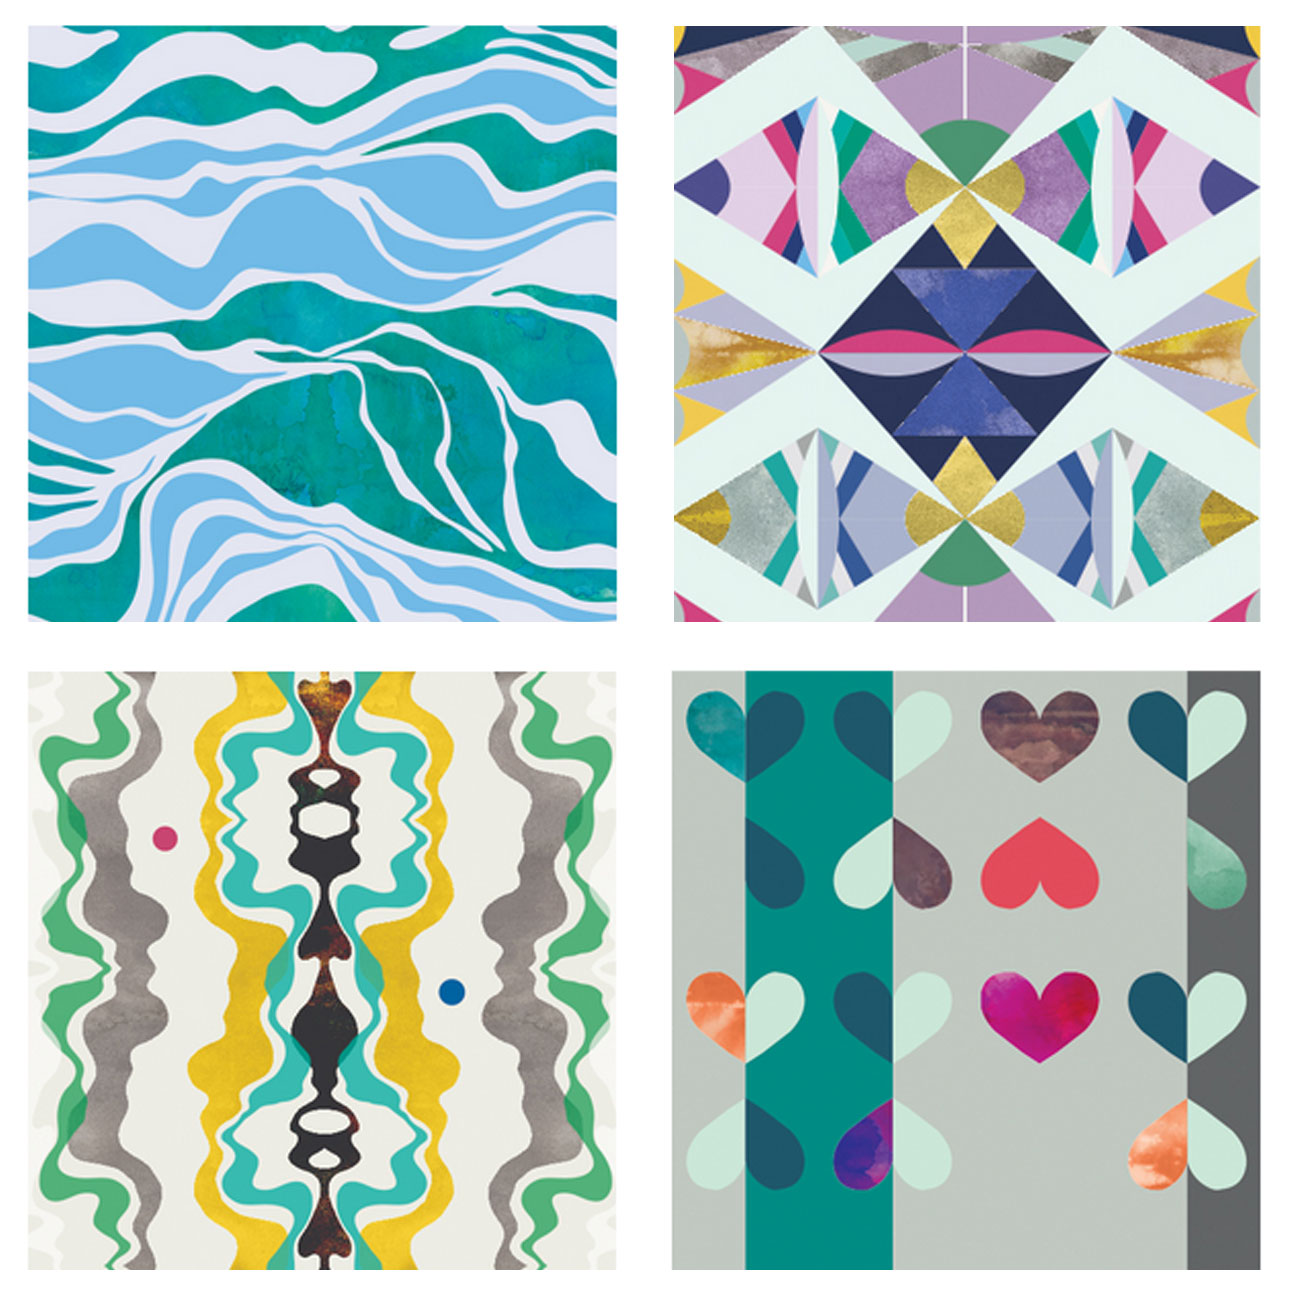 Timothy Sue Removable Wallpaper (Waterways - Seafoam, top left; Coconino - Cactus Bloom, top right; Sixty Seven - Yellow Earth, bottom left; and Hearts Apart - Teal Purple, bottom right)